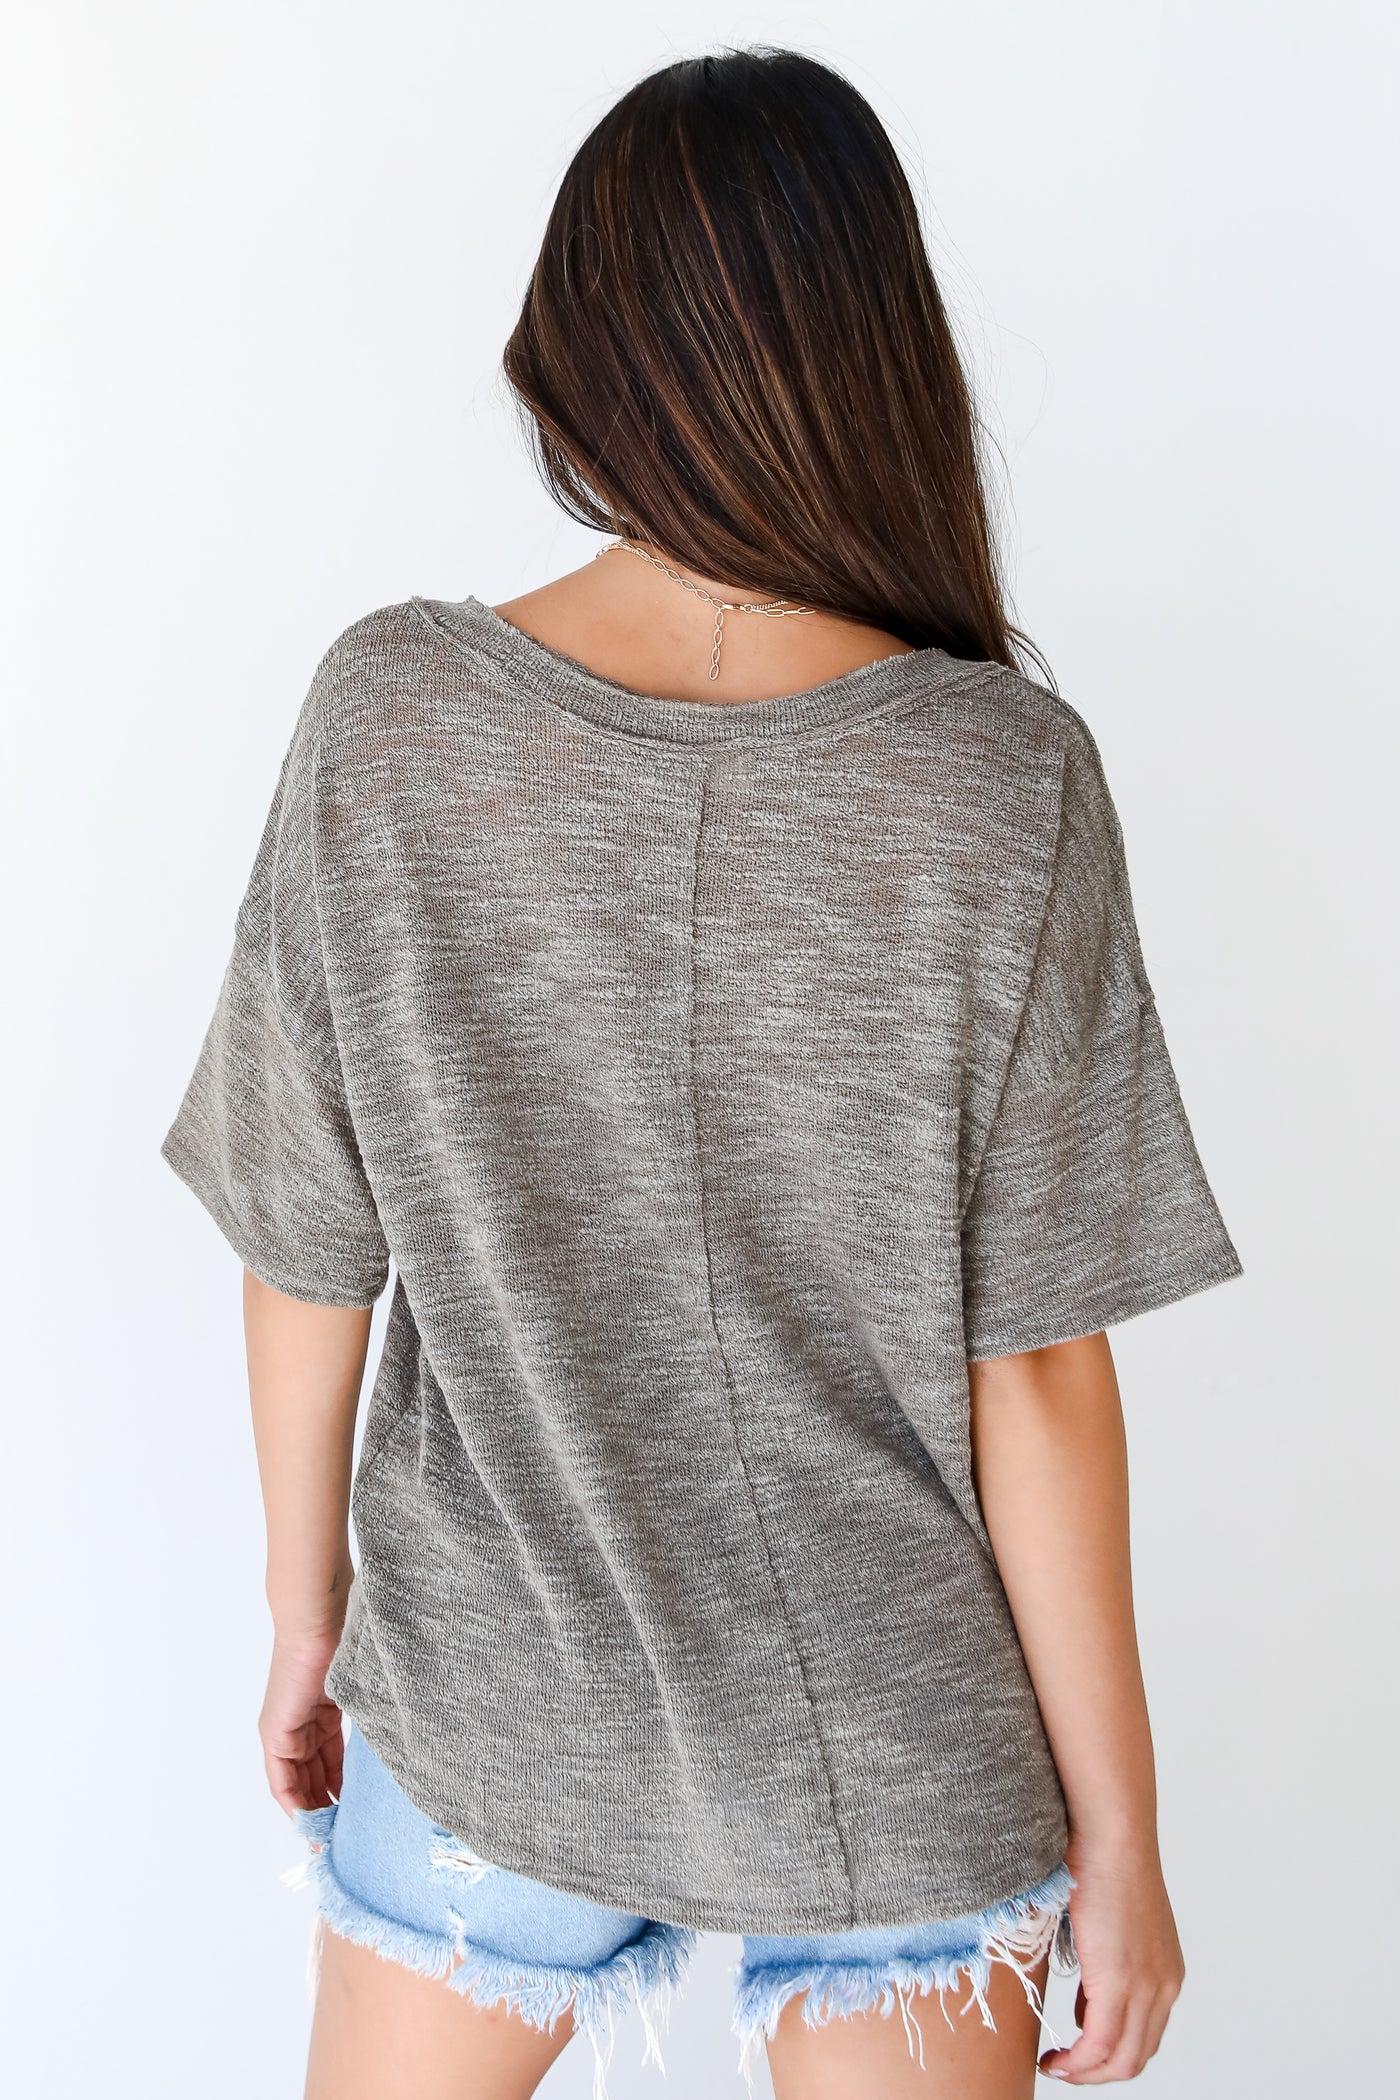 olive Knit Top back view